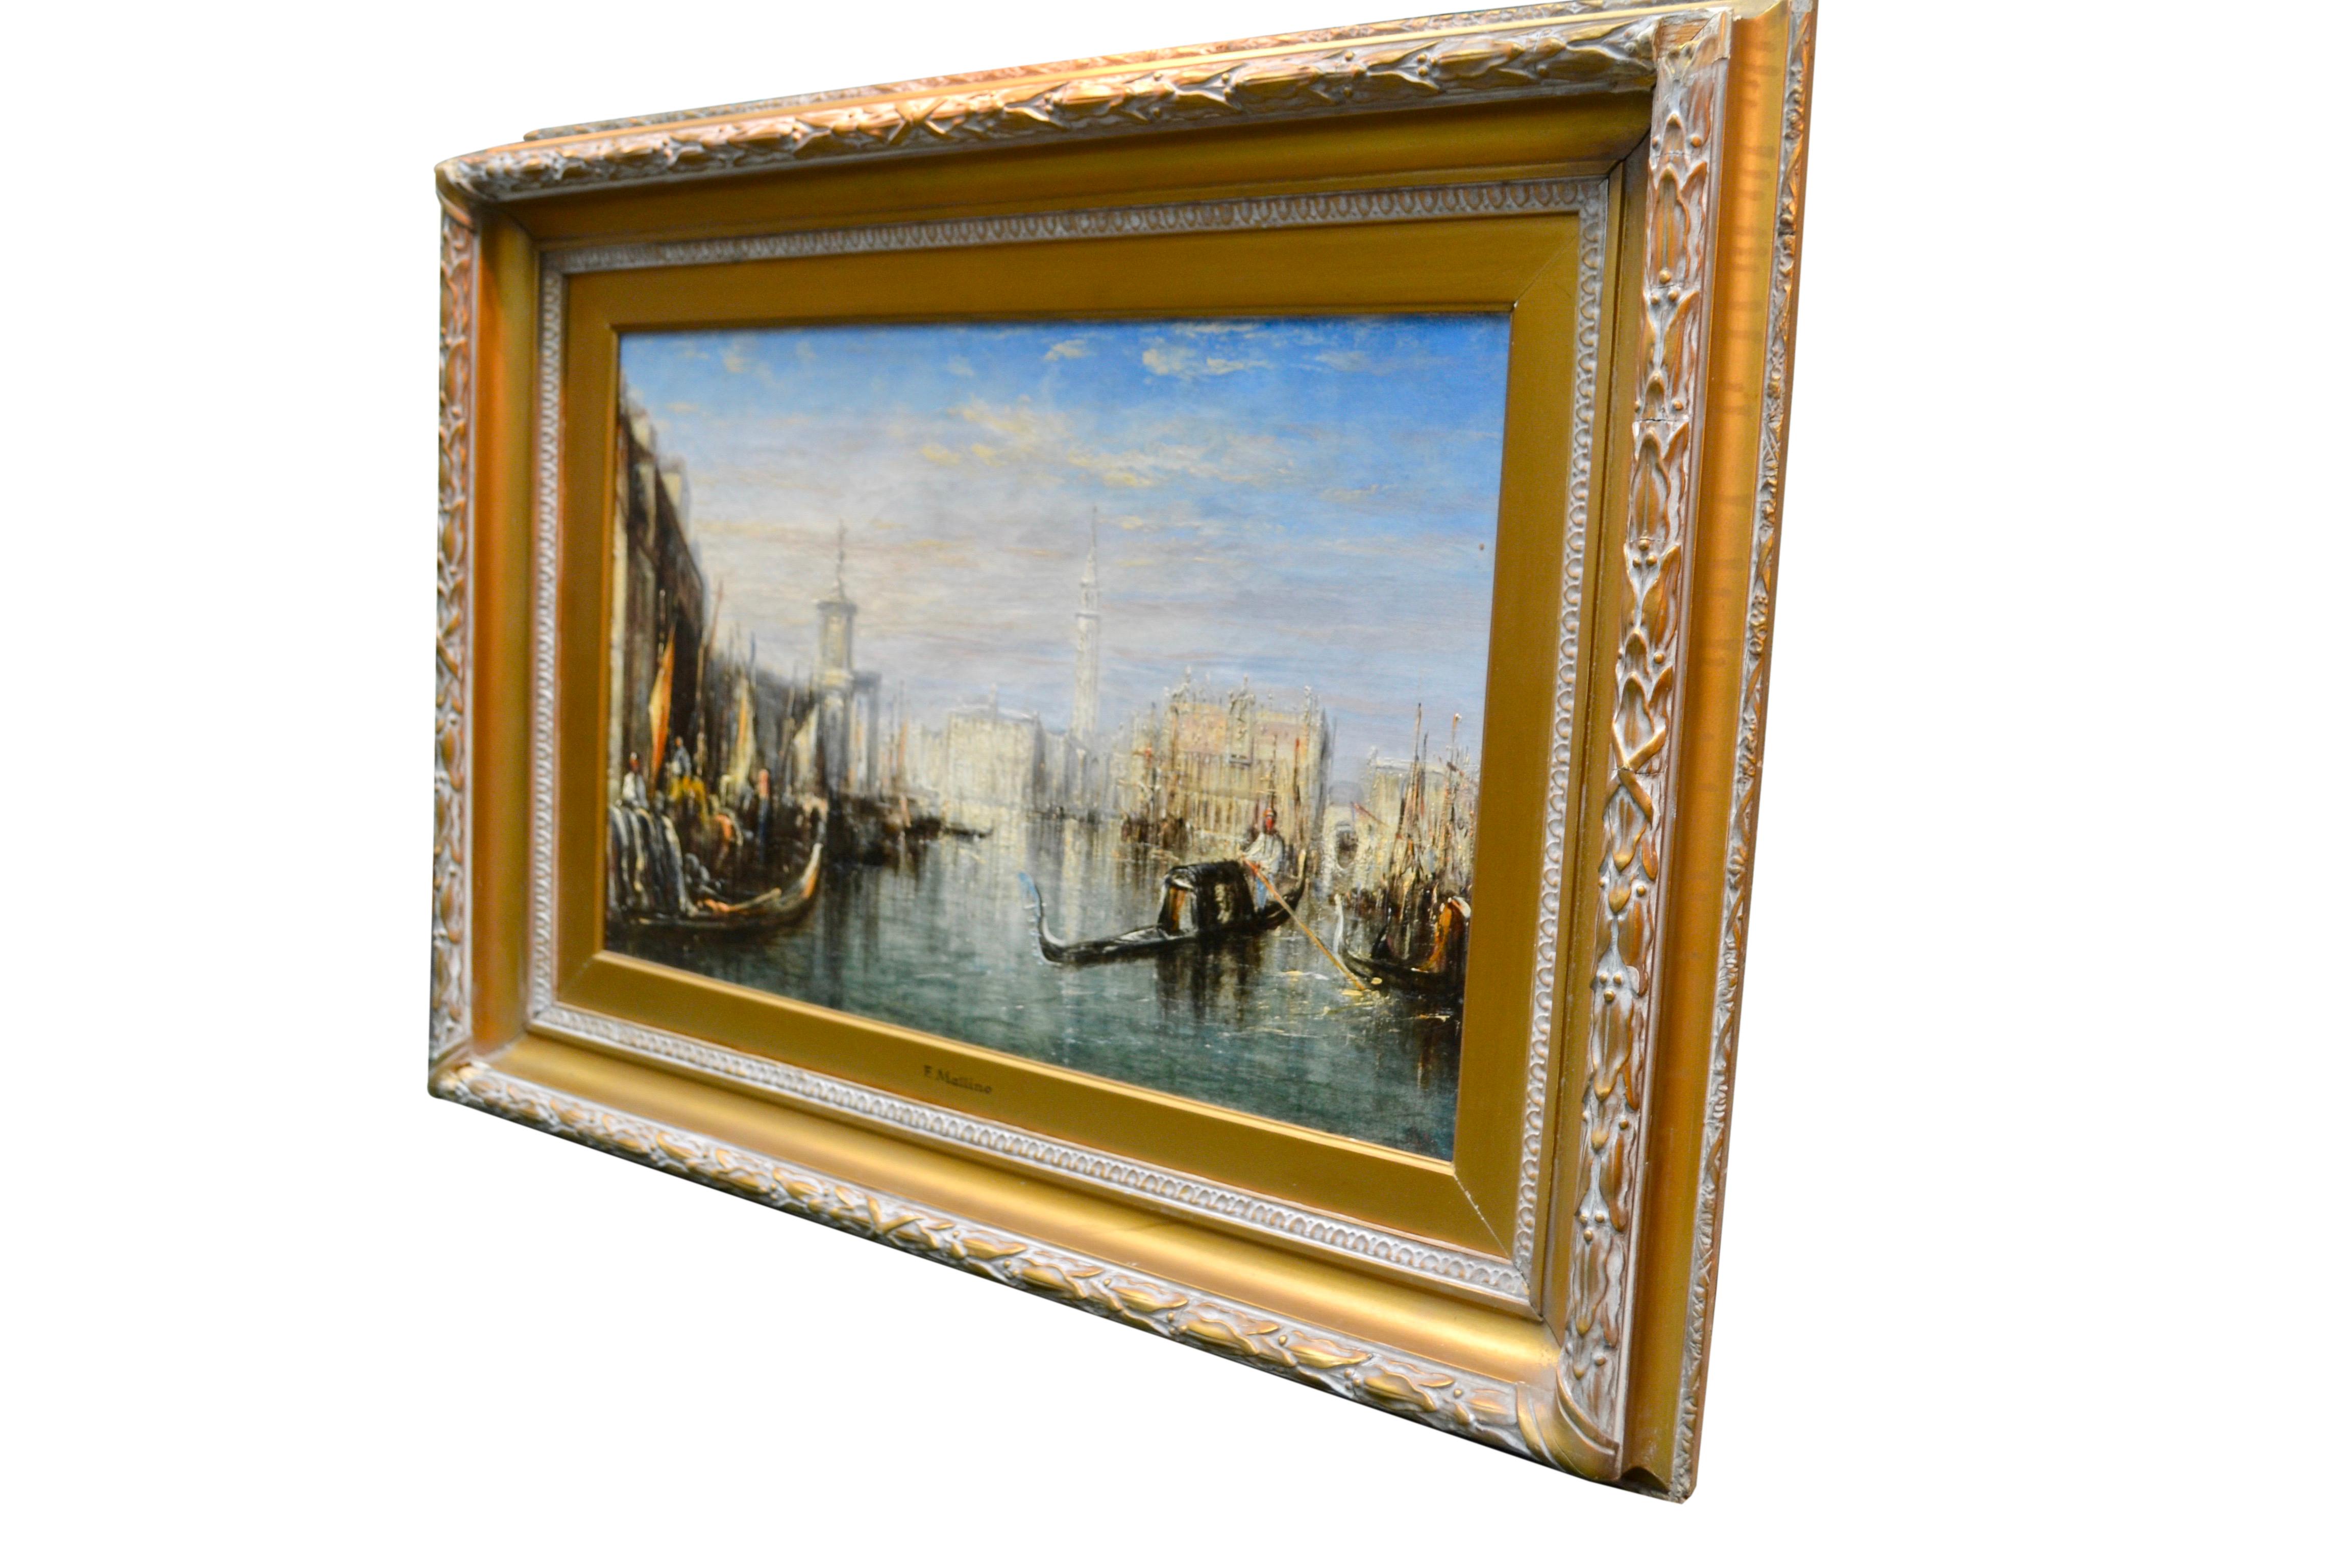 A signed oil on canvas of the Grand Canal in Venice by the 19th century English Italian artist Francis Moltino. Francis Moltino (1818–1874) was an Italian painter, resident in London in the mid-1840s, who specialized in landscapes and coastal scenes